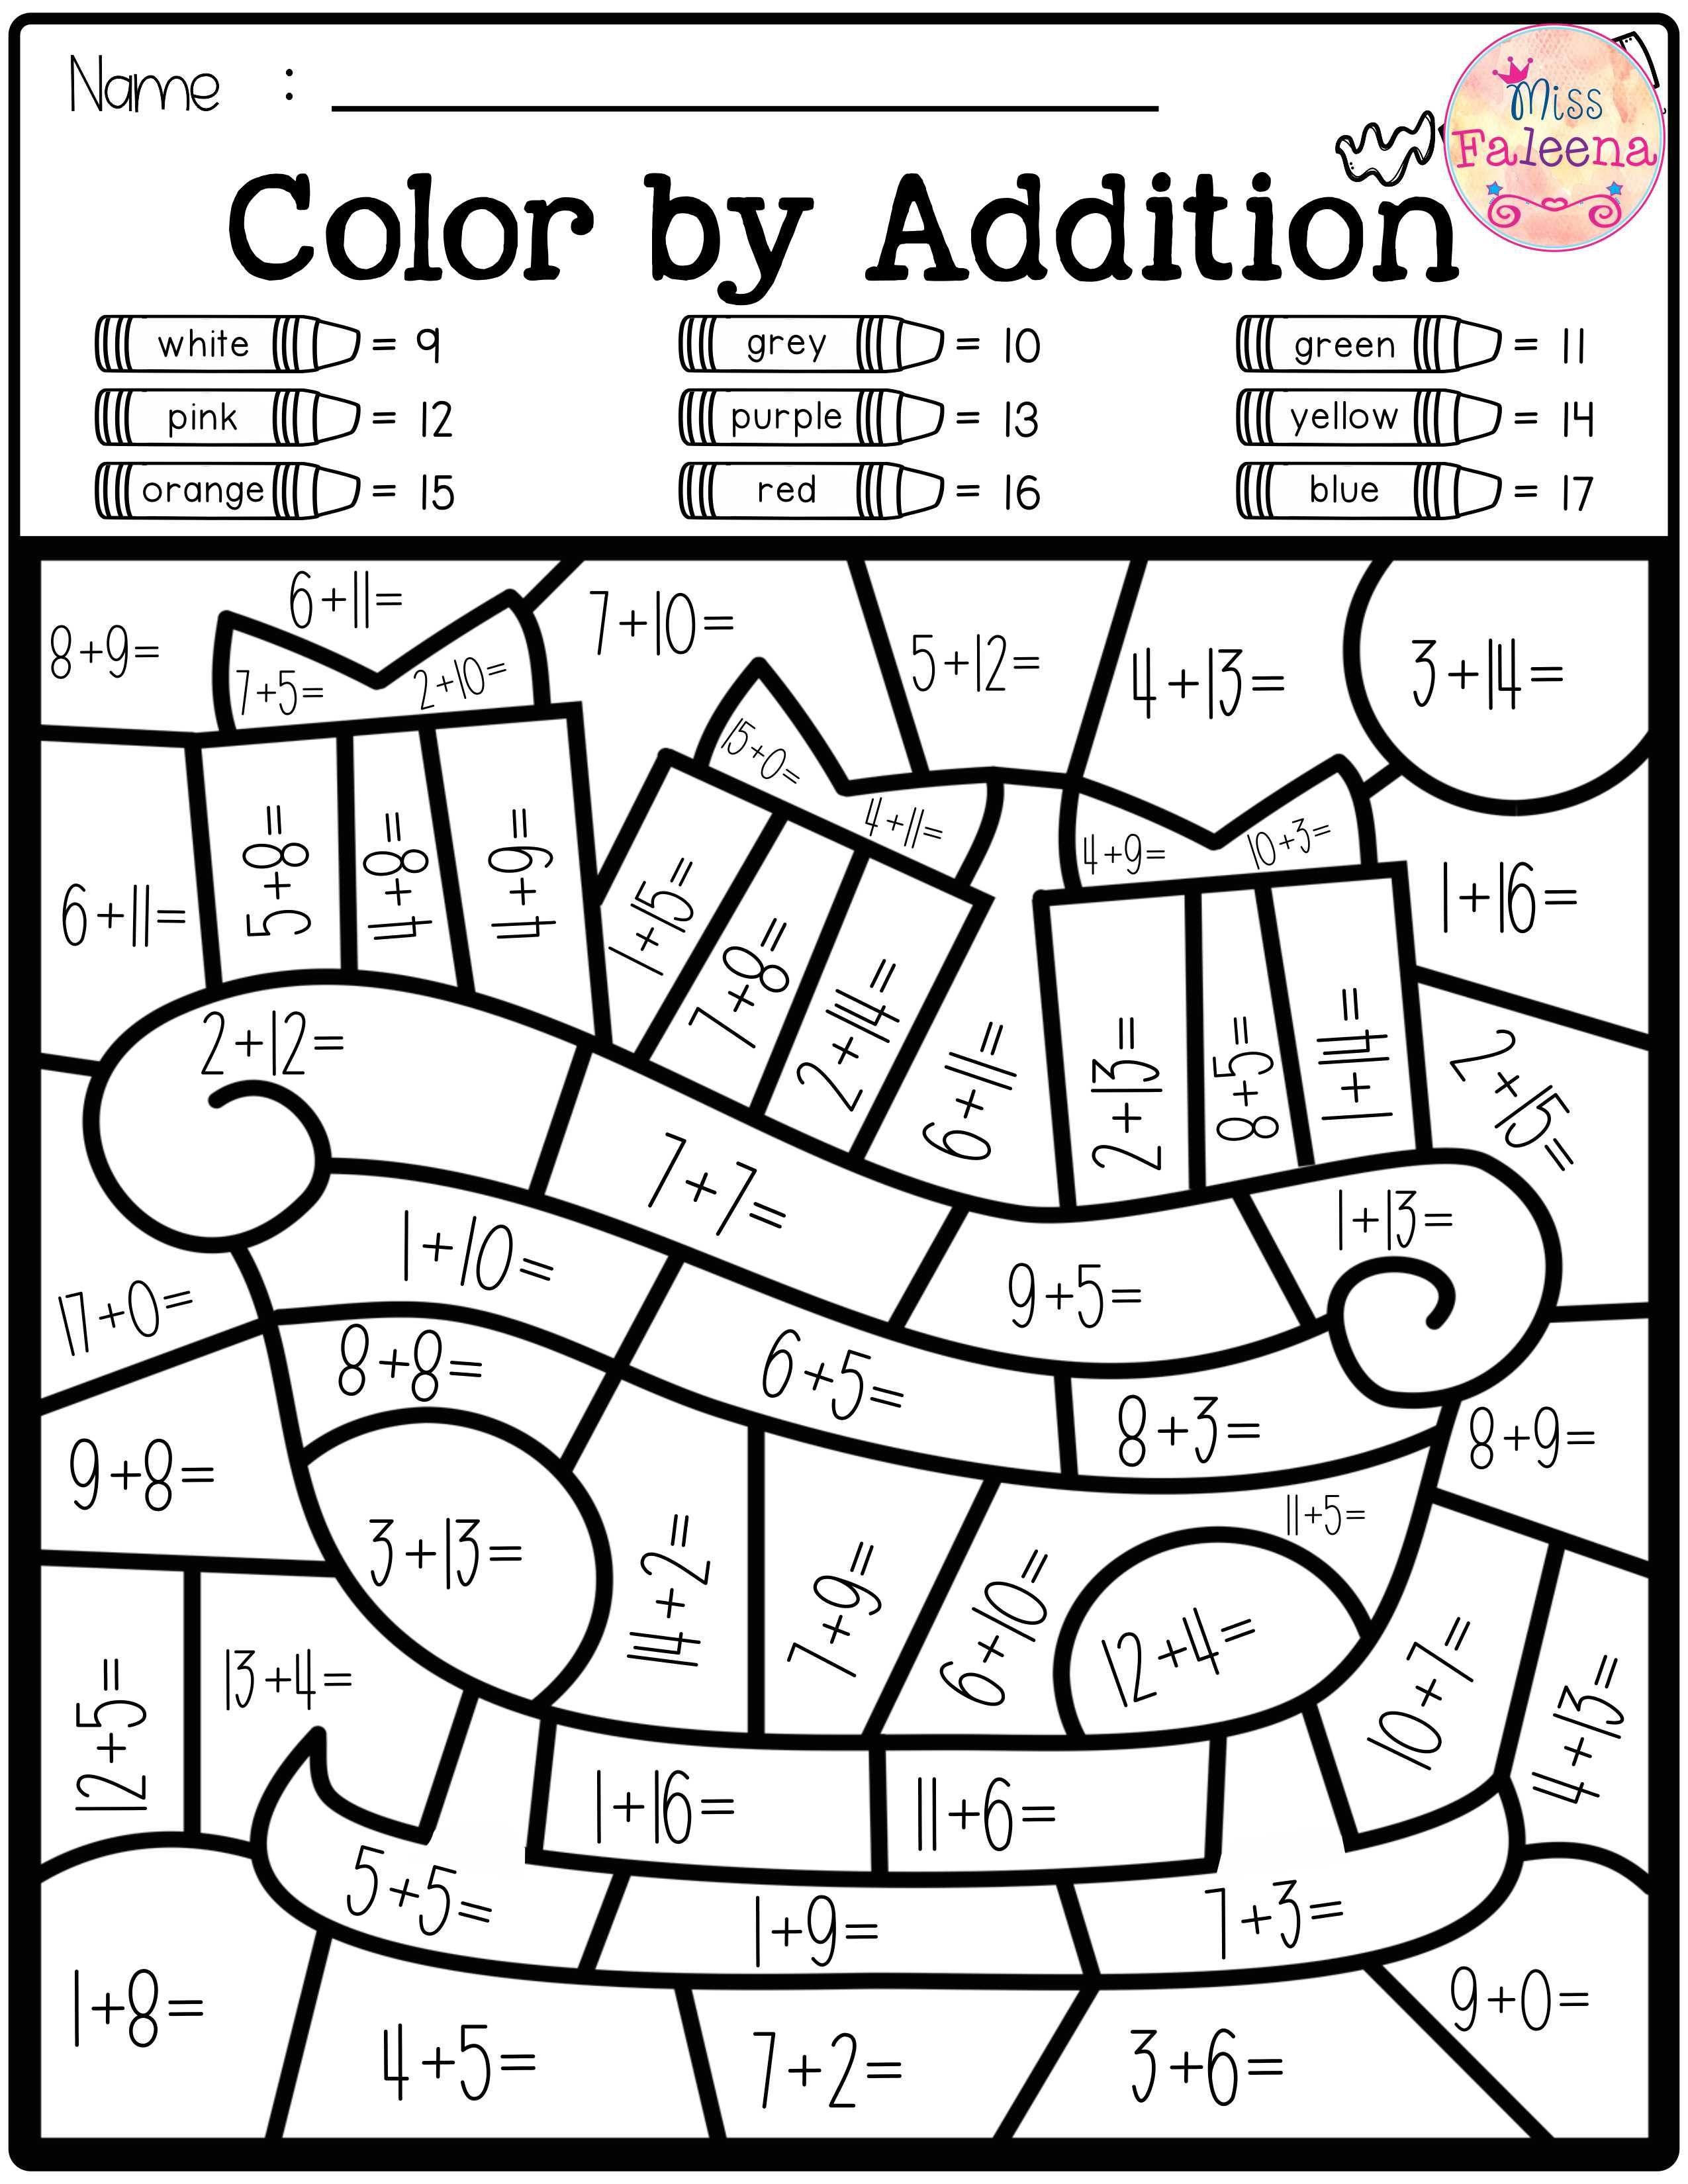 Math Worksheets Color by Number Coloring Pages (Page 1) - Line.17QQ.com